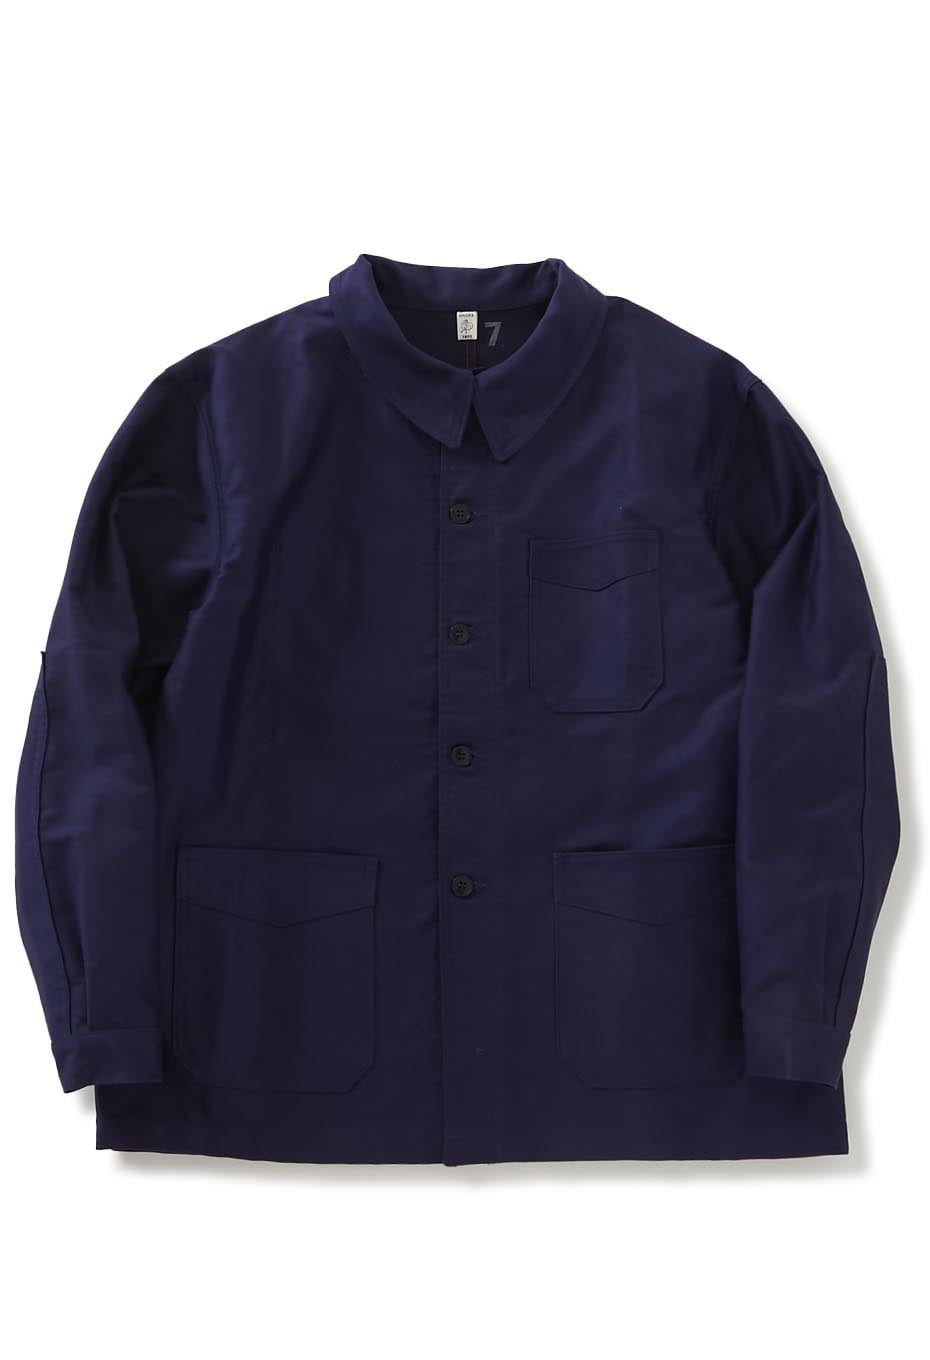 LE TRAVAILLEUR GALLICE Traditional worker jacket